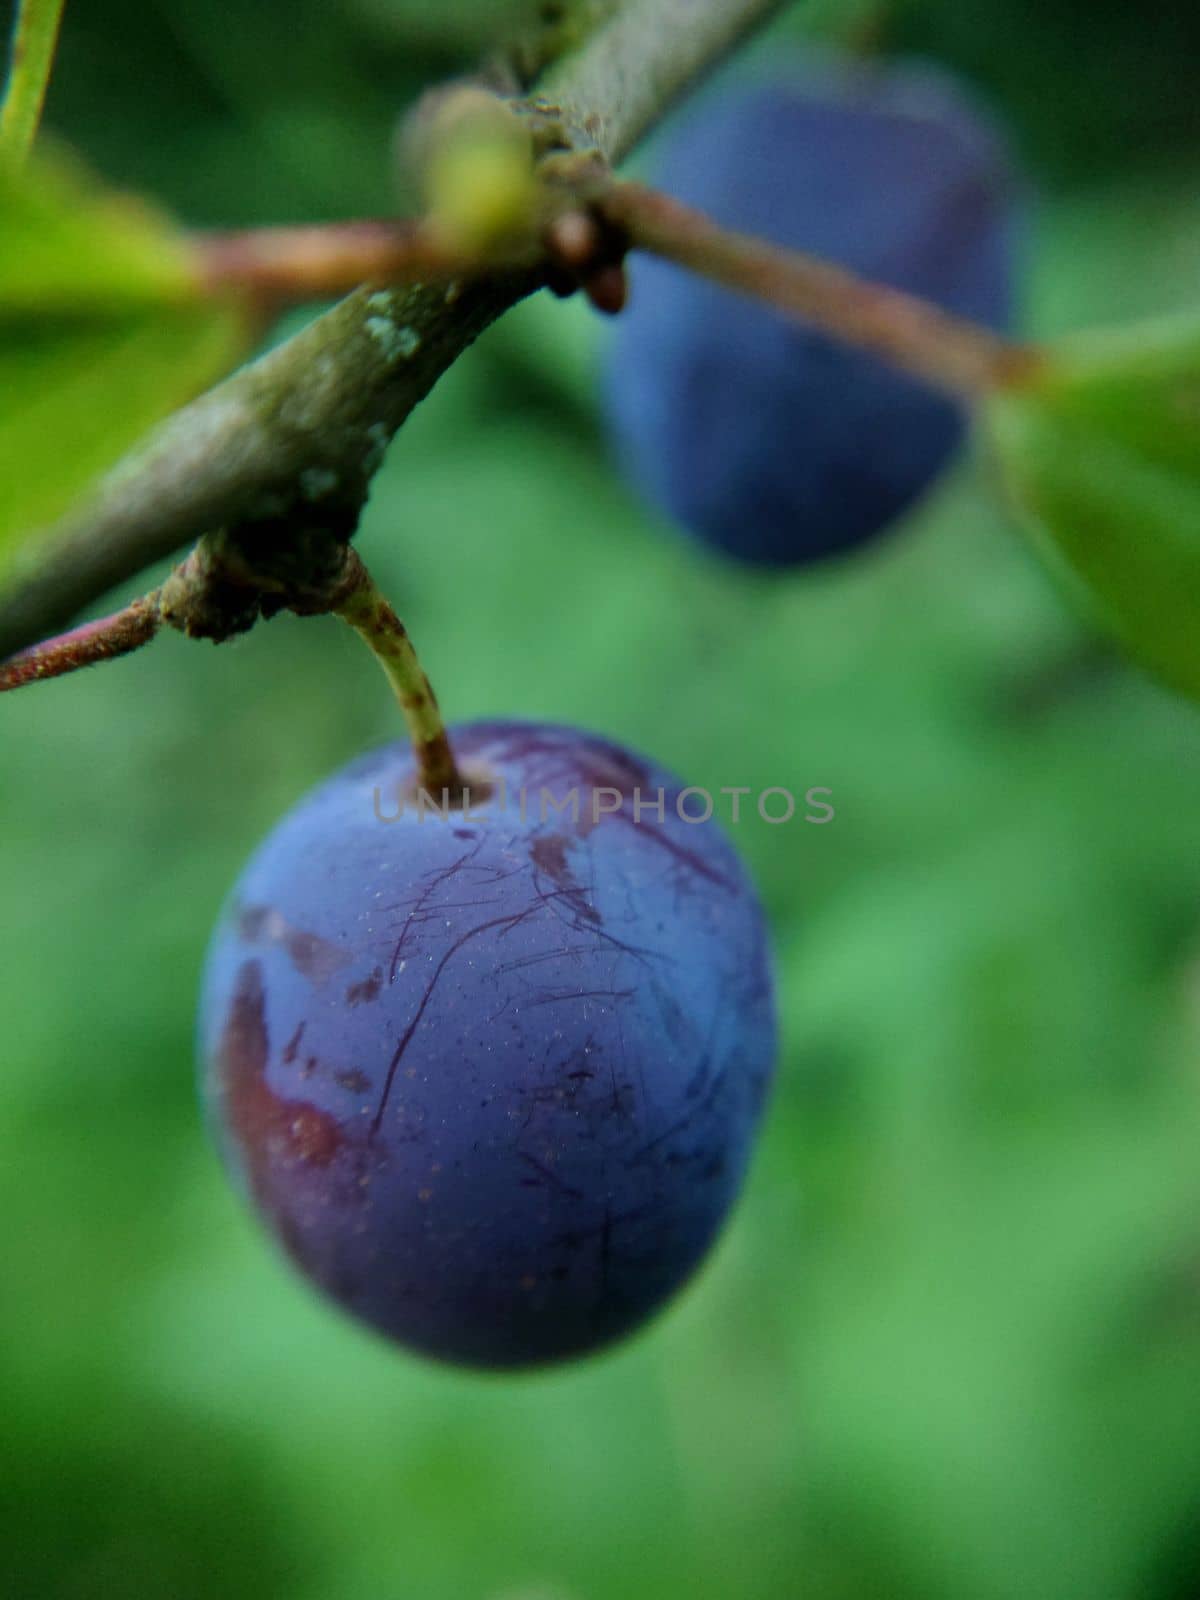 Ripe plums hanging on a tree close-up selective focus by Mastak80